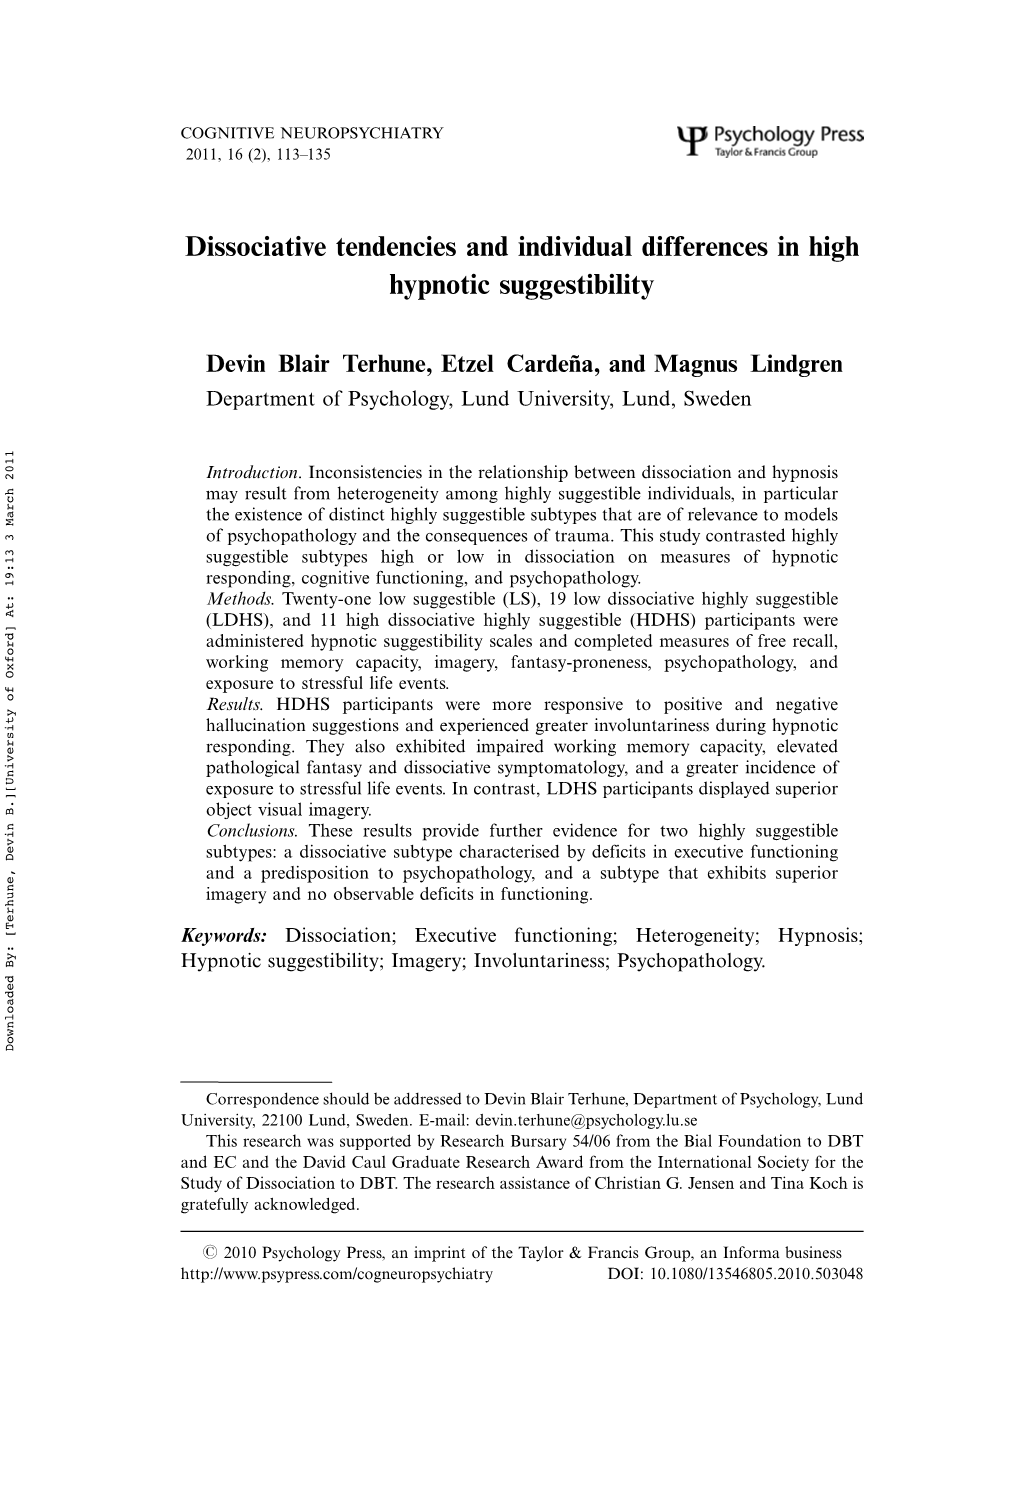 Dissociative Tendencies and Individual Differences in High Hypnotic Suggestibility